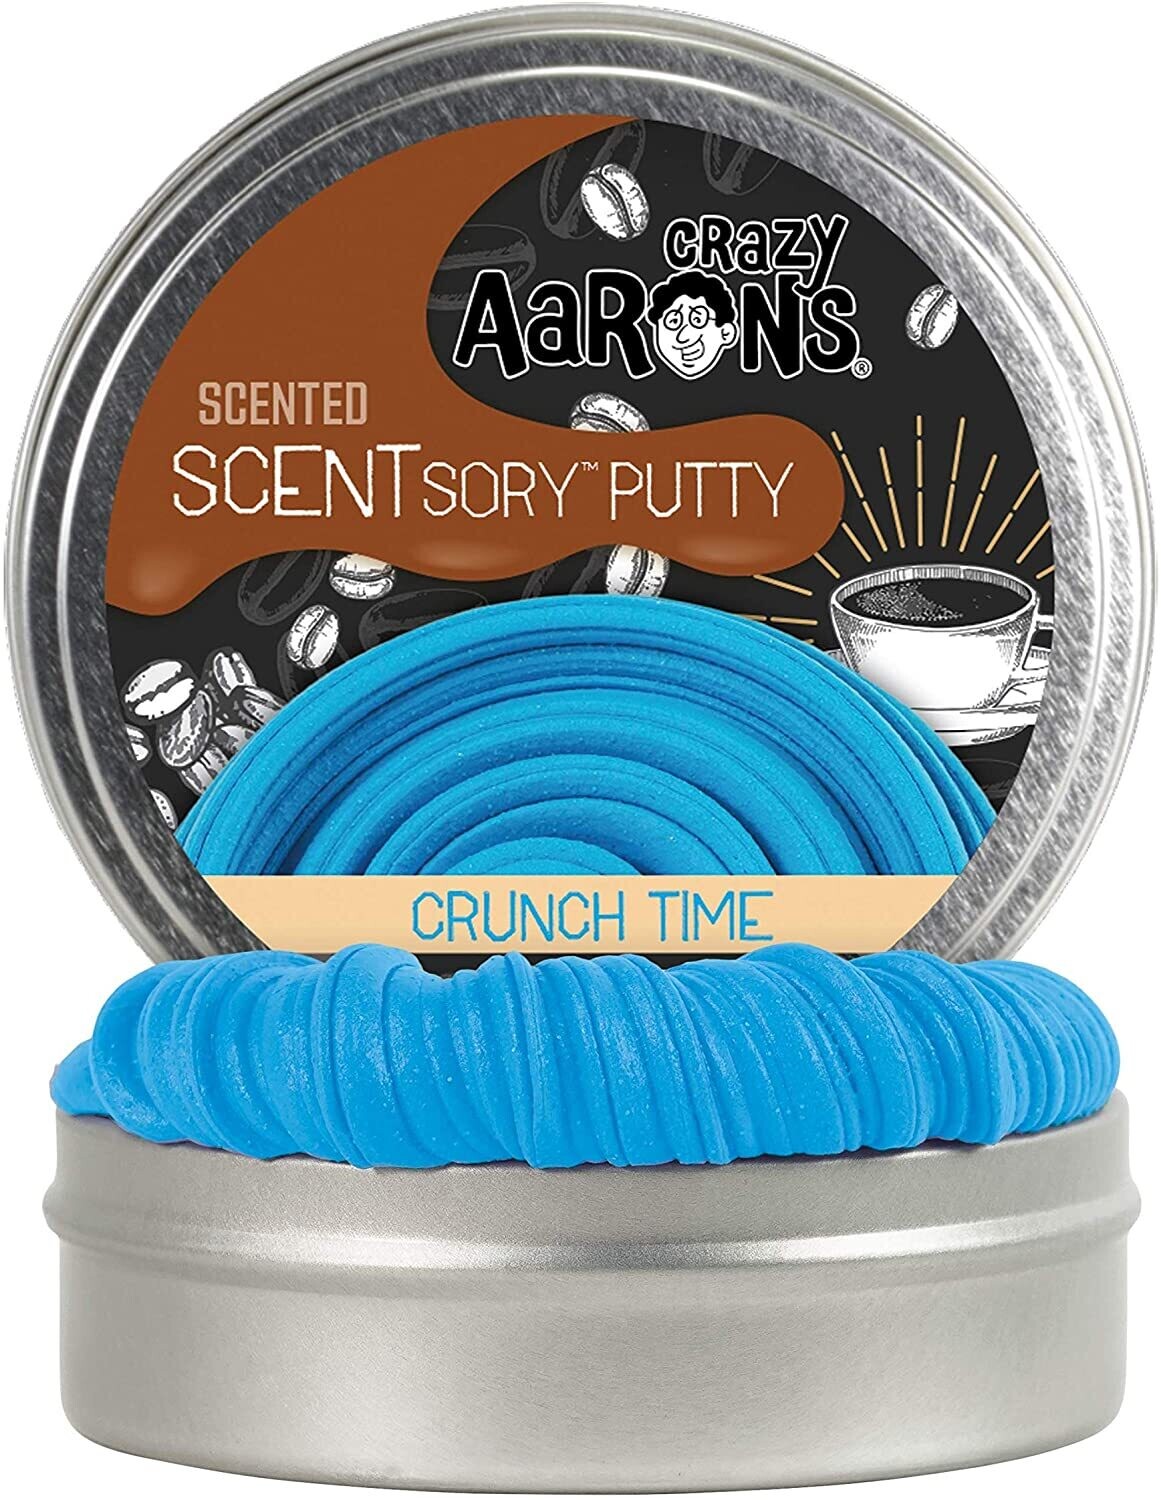 Crazy Aaron's Scentsory Crunch Time 2.75" Tin